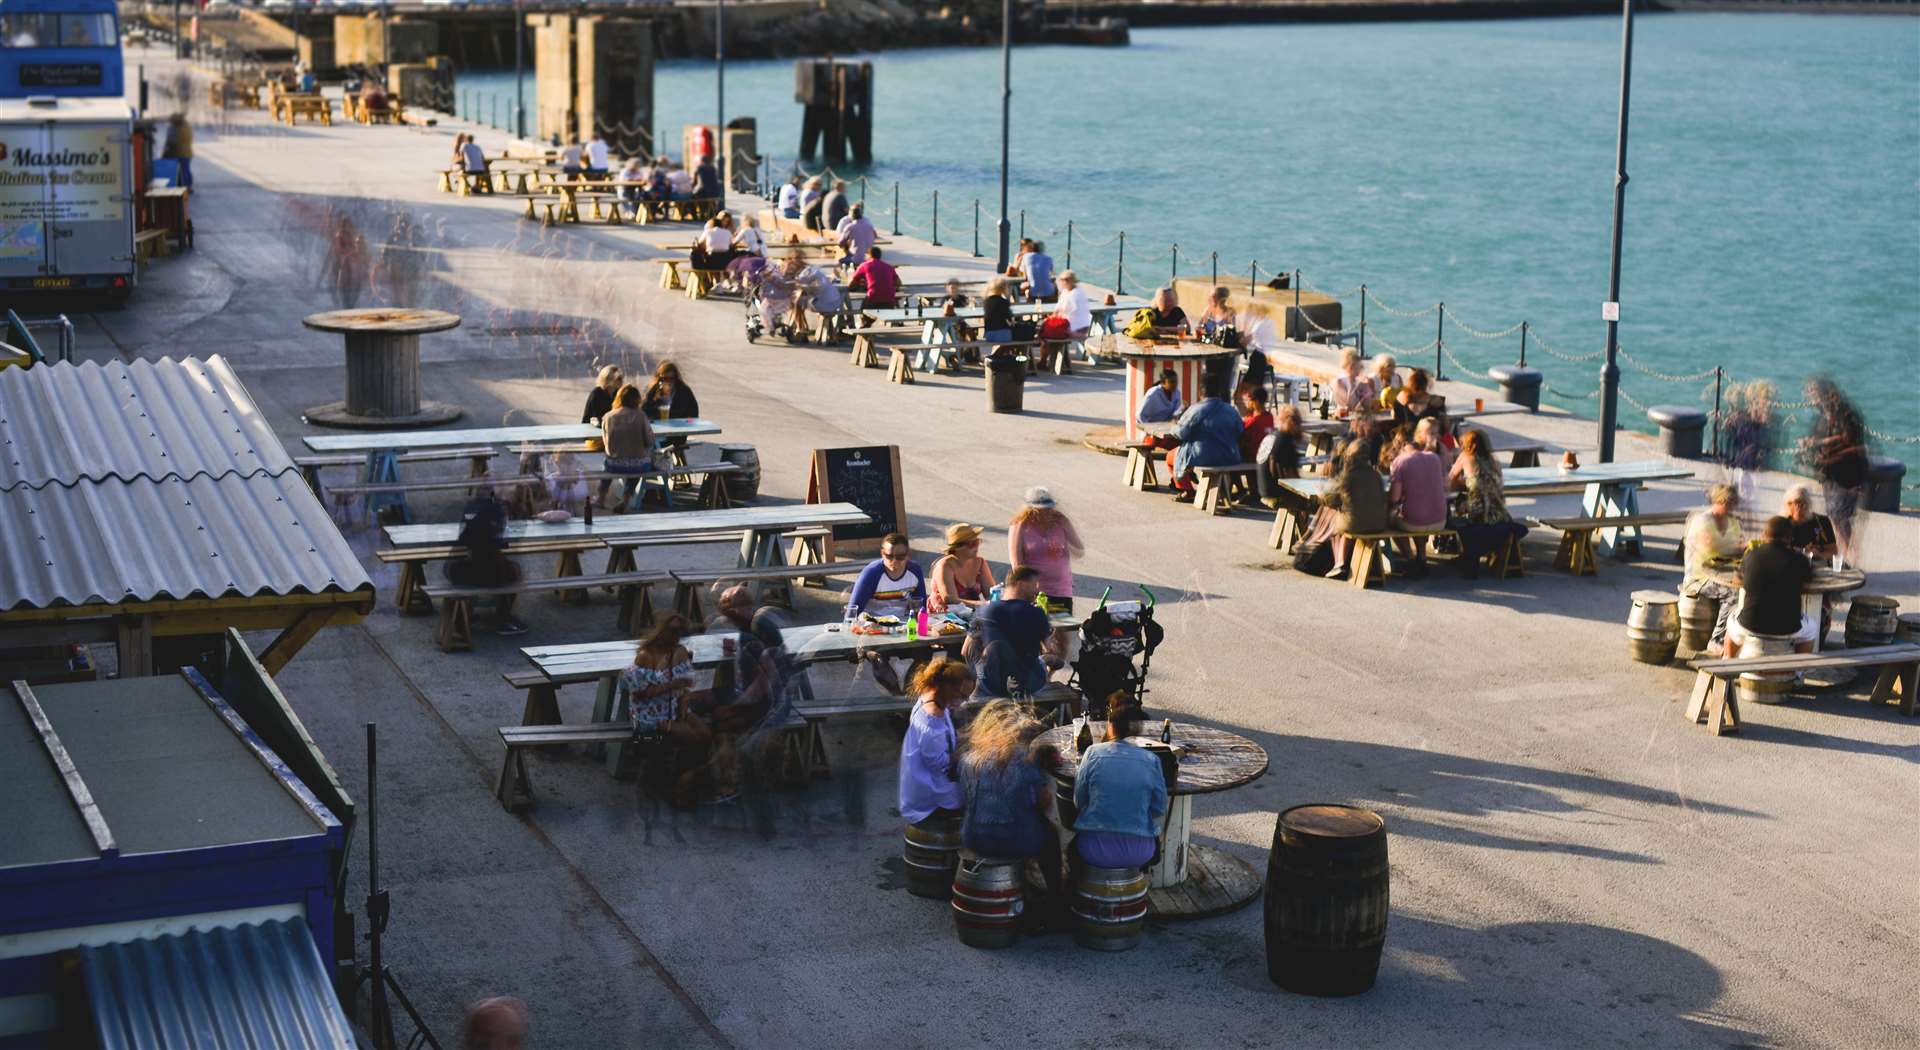 The seaside spot has become popular with locals and visitors alike. Picture: Folkestone Harbour Arm